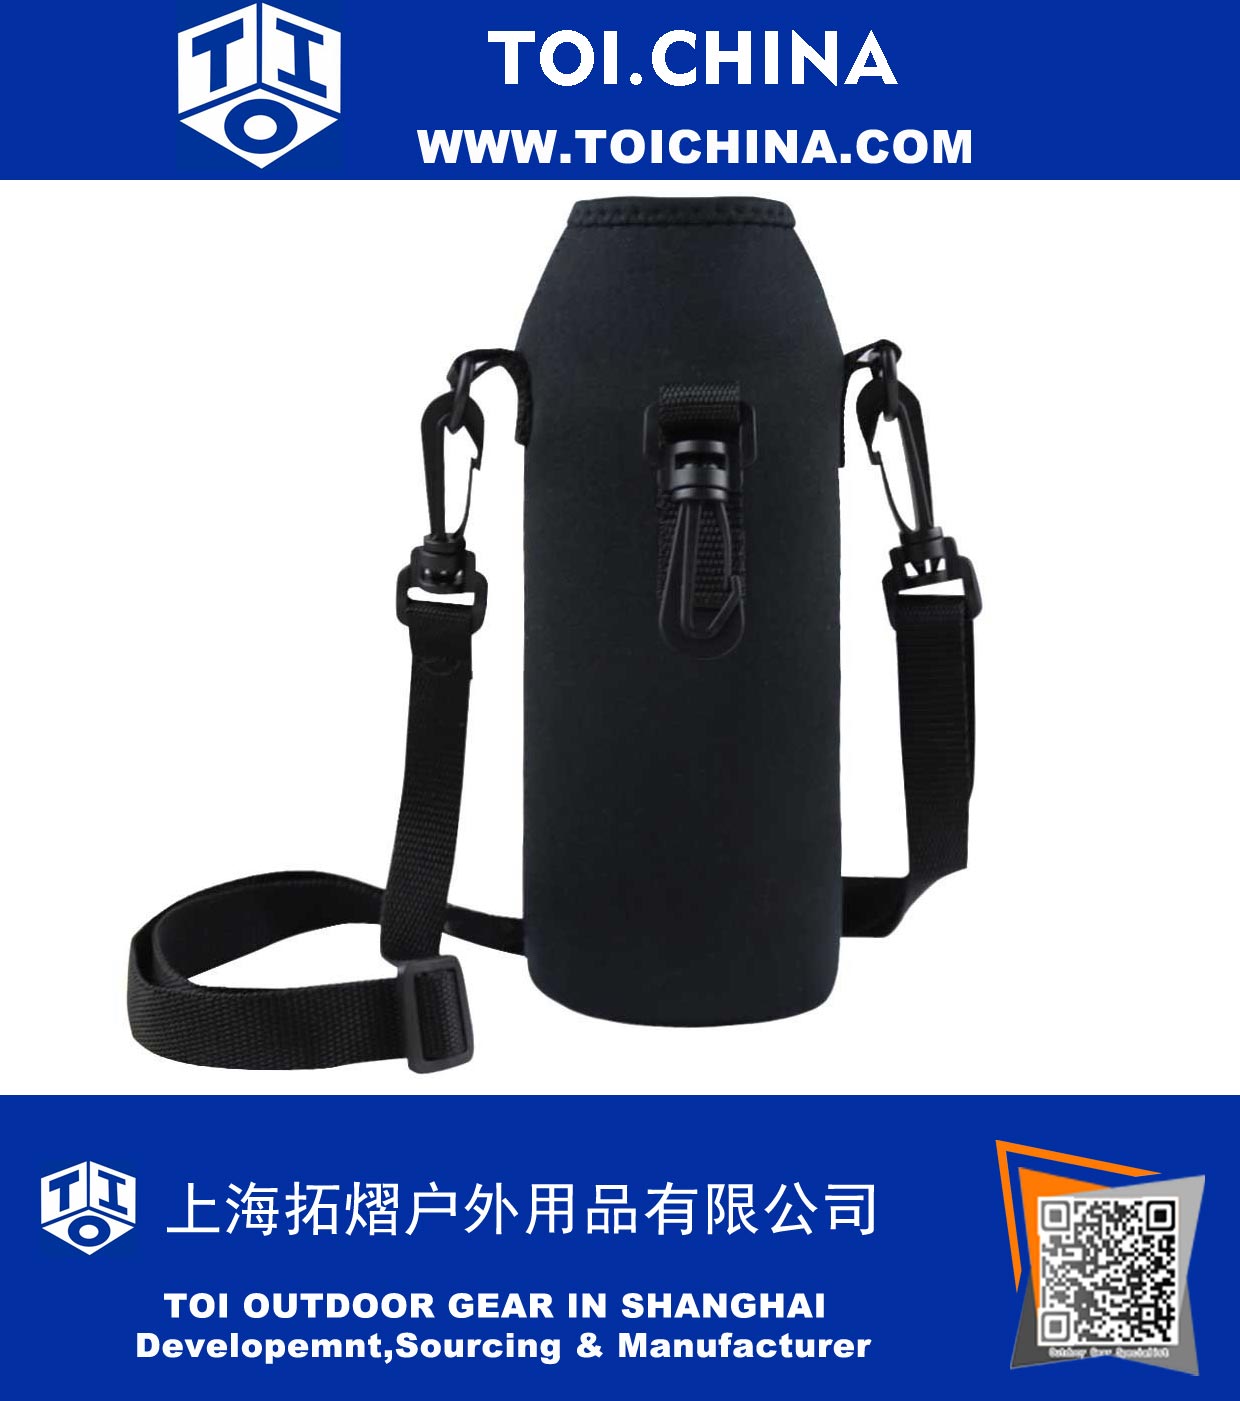 Travel Hiking Camping Insulator Case for Stainless Steel Plastic Water Bottle Neoprene Carrier Bag Protector with Adjustable Shoulder Strap